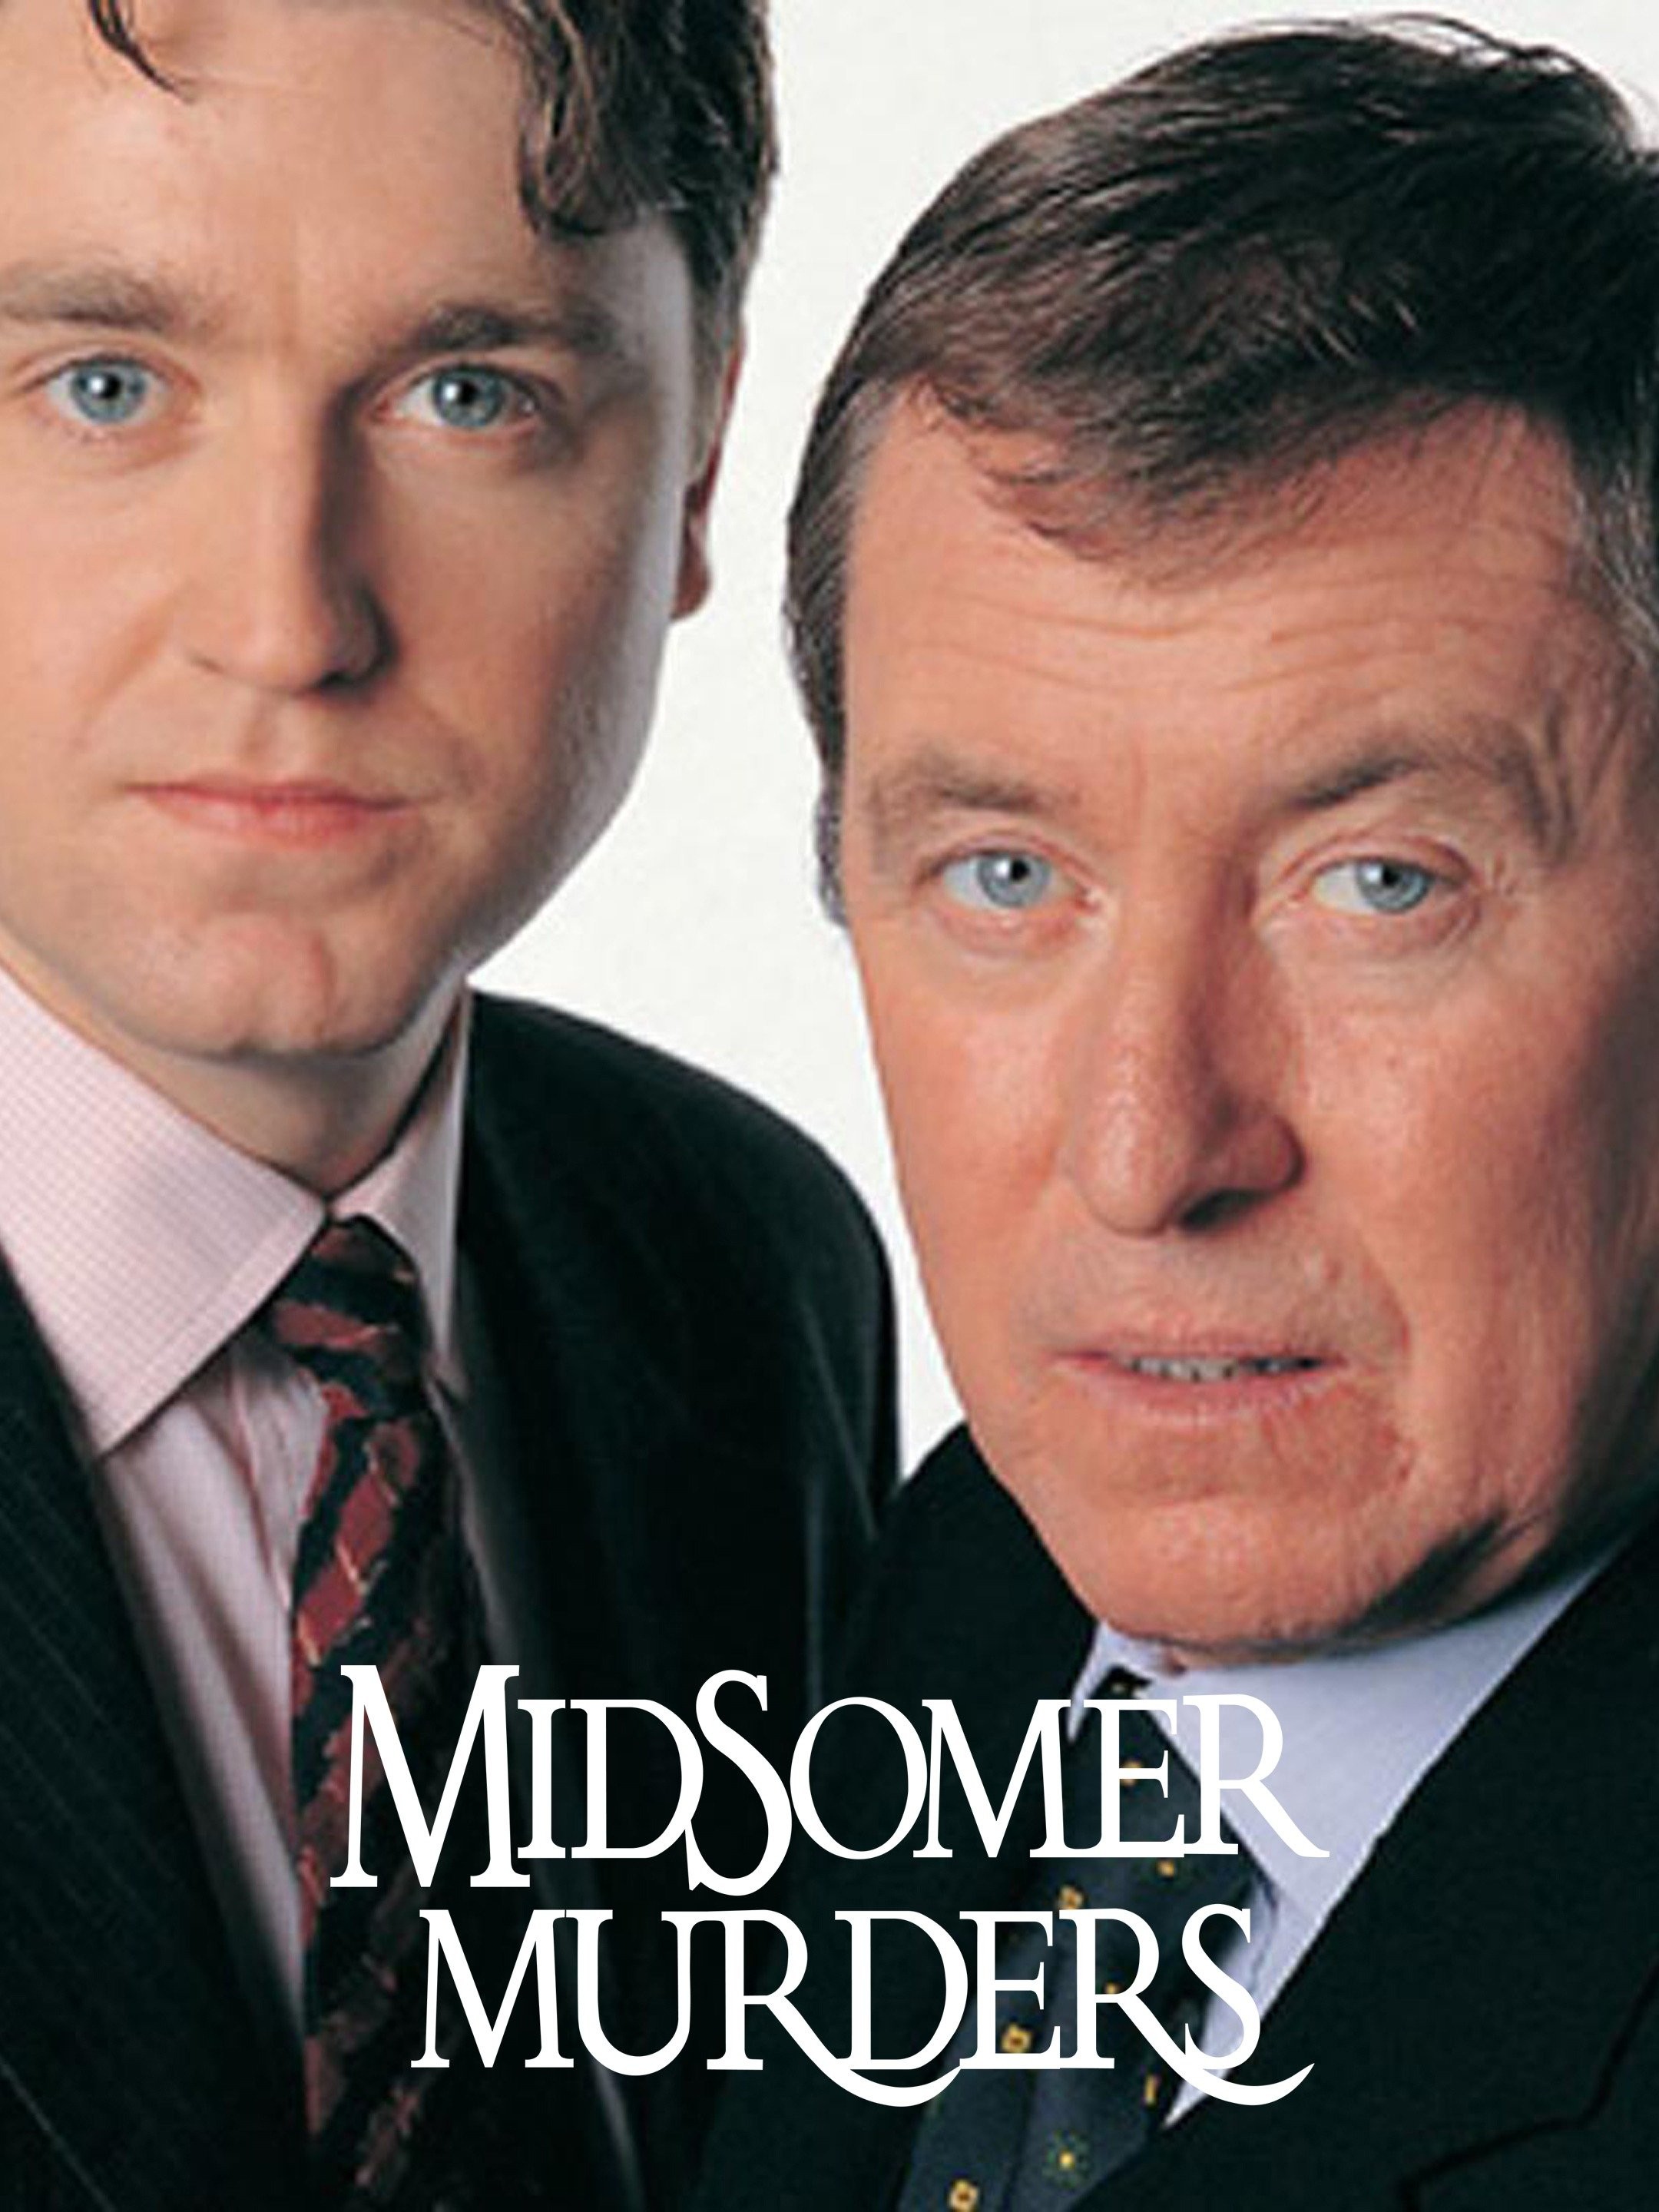 carol ruskin recommends midsomer murders season 1 episode 4 pic